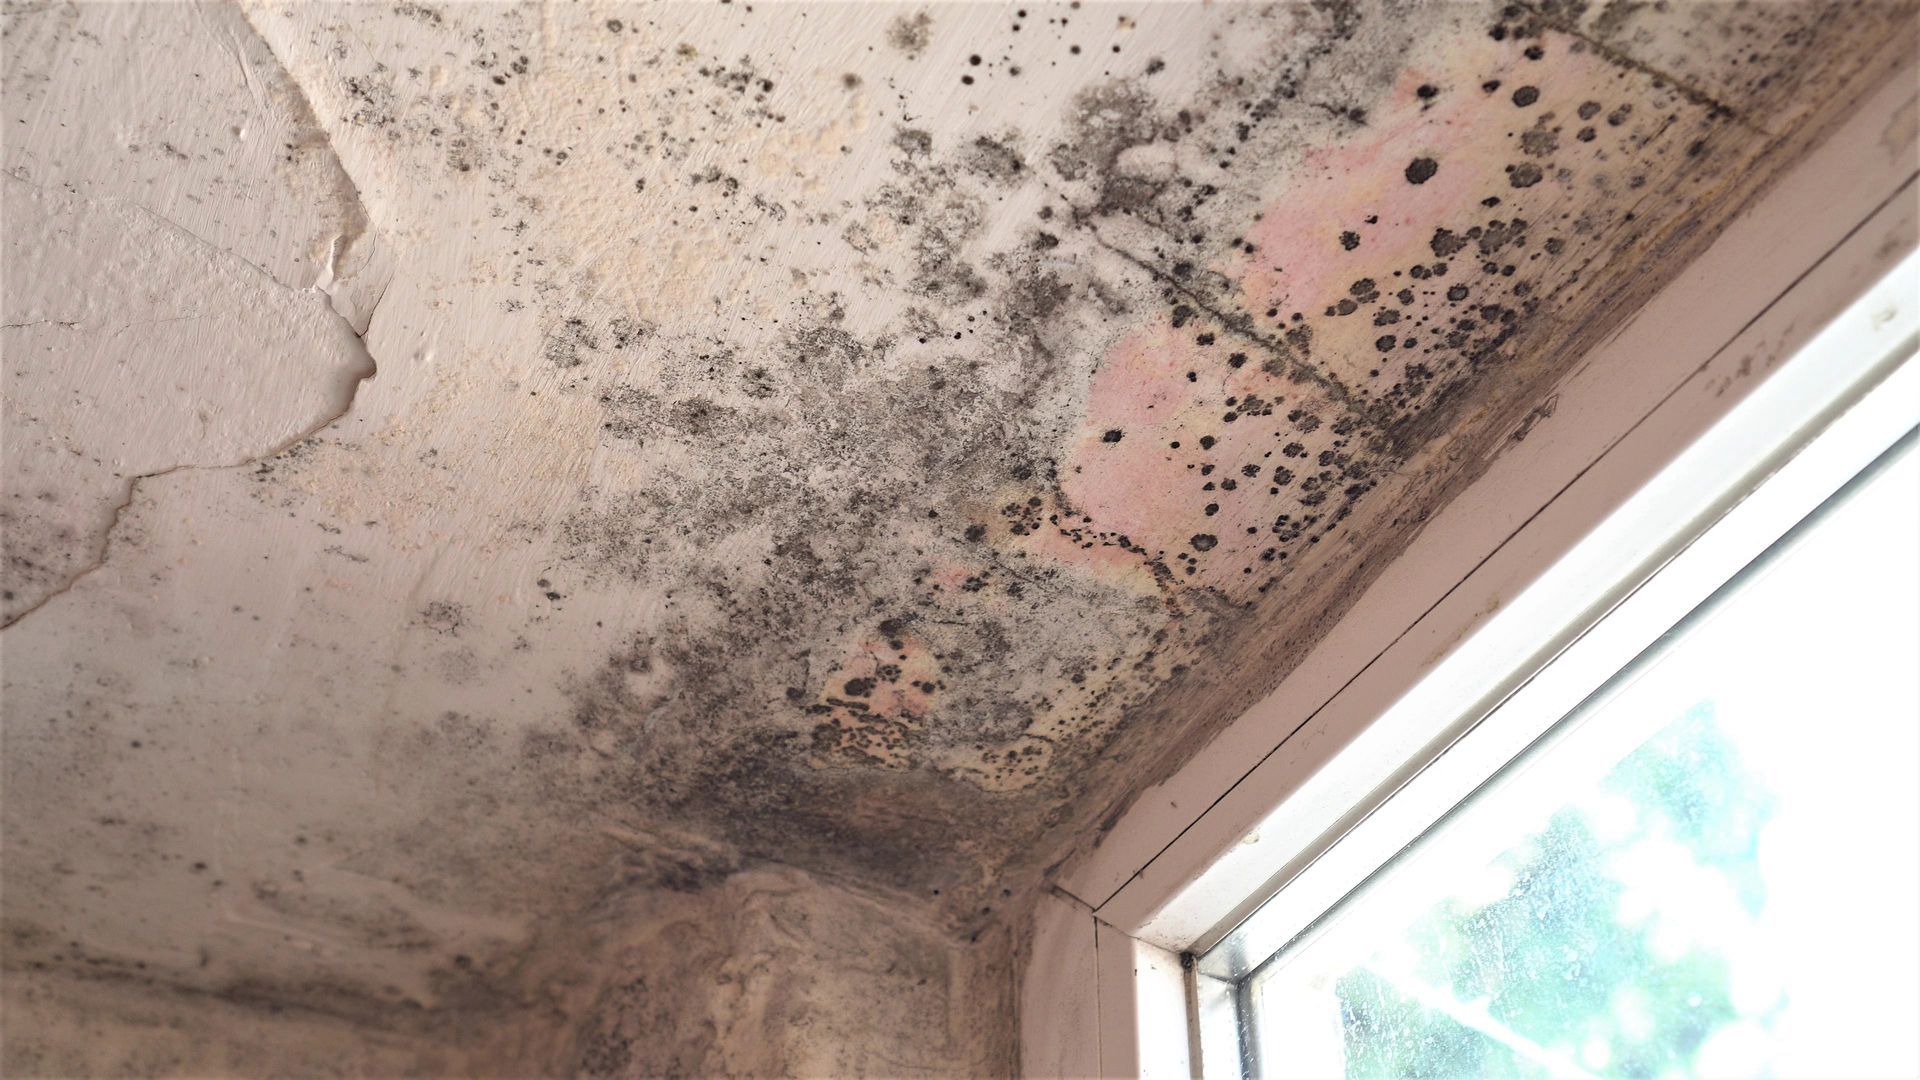 Moldy Ceiling of the House